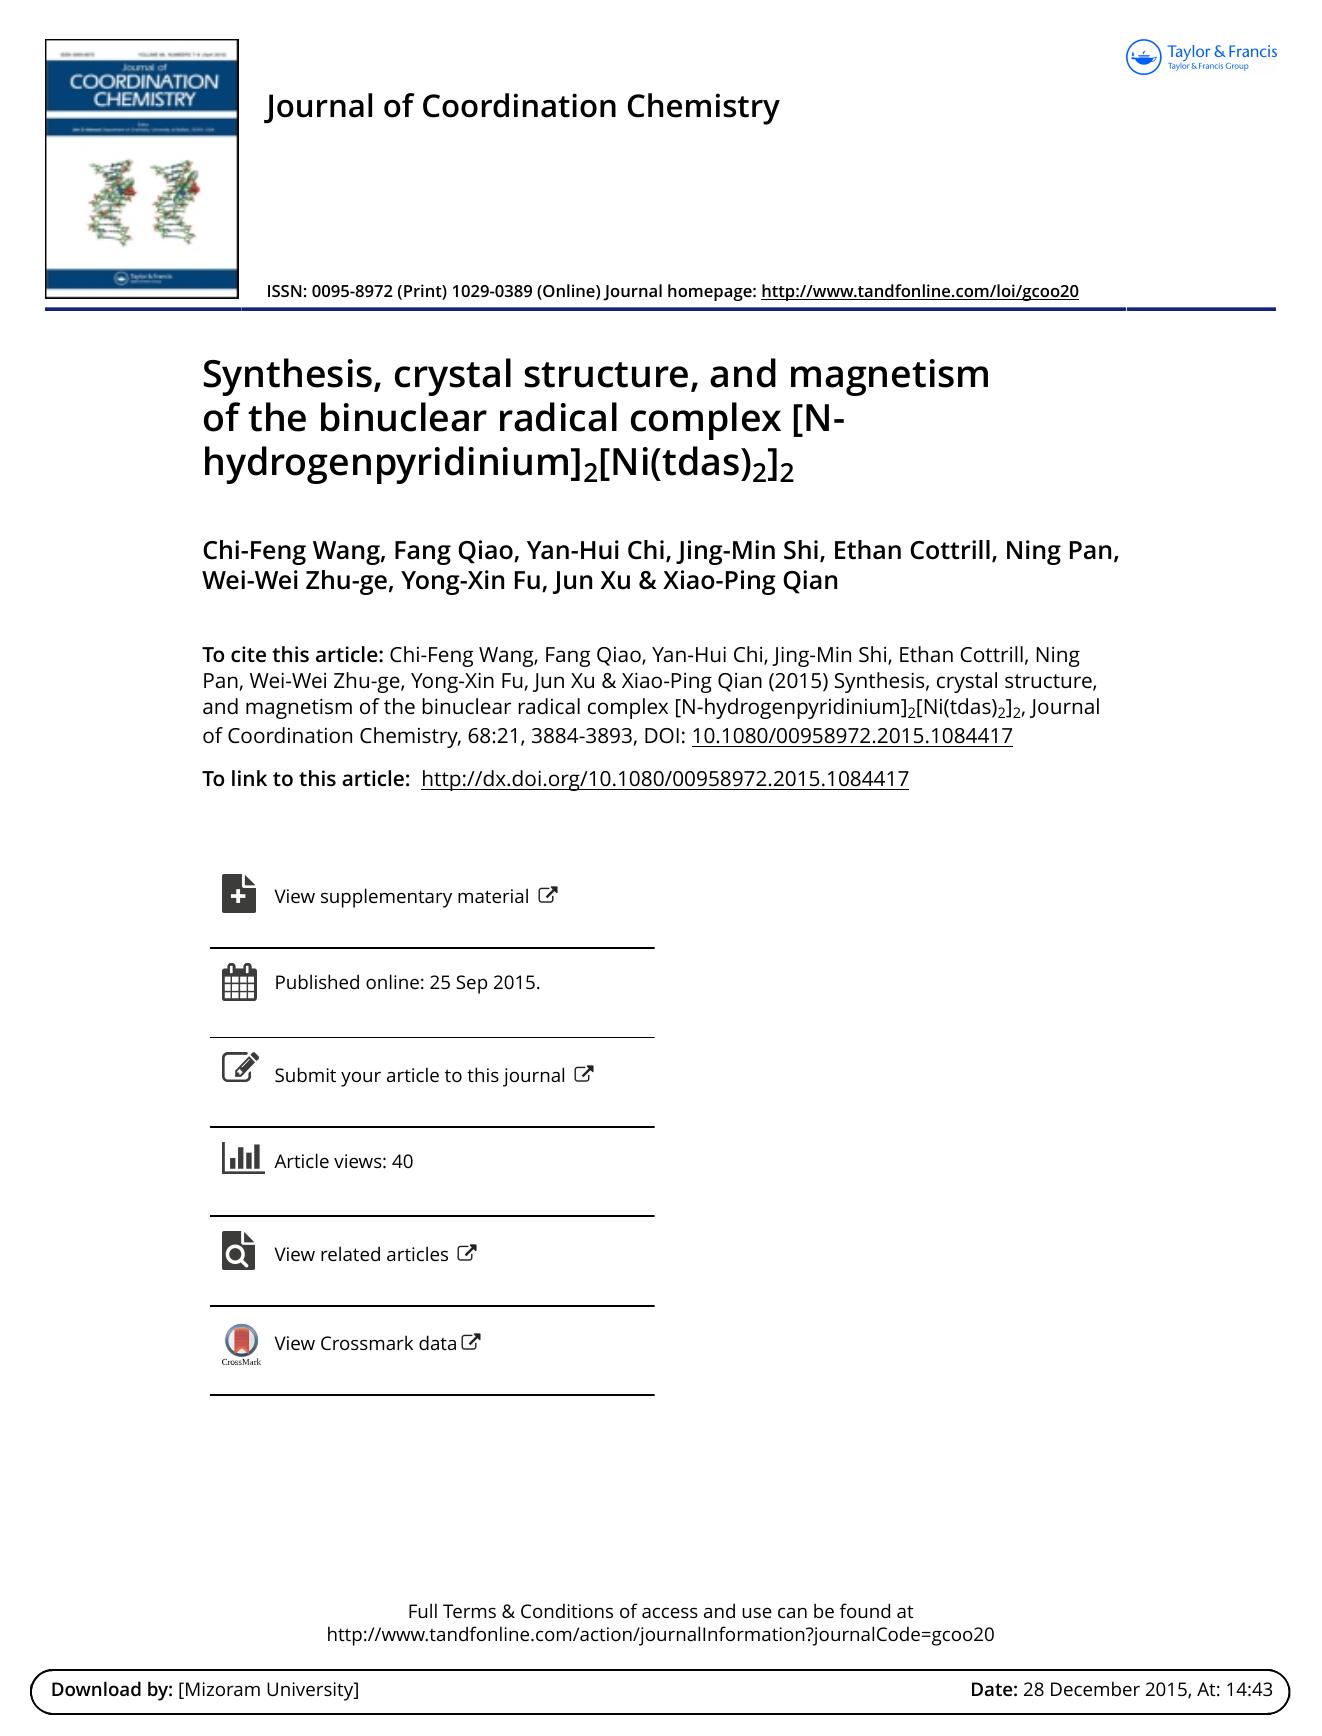 Synthesis, crystal structure, and magnetism of the binuclear radical complex [N-hydrogenpyridinium]2[Ni(tdas)2]2 by Chi-Feng Wang